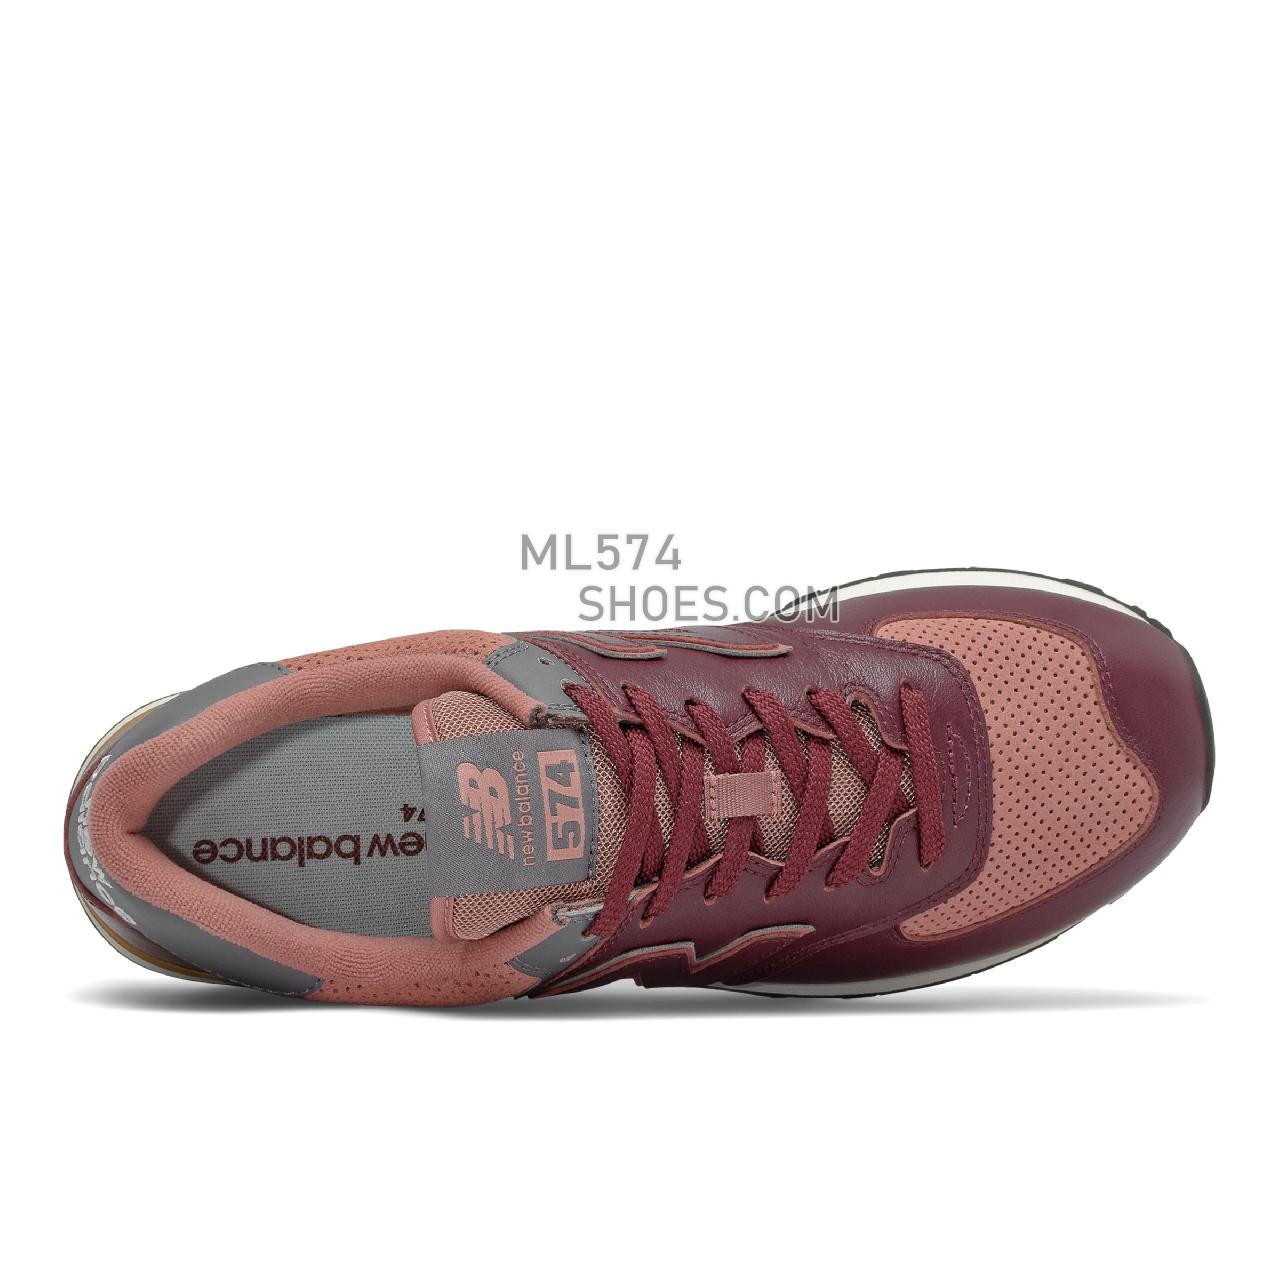 New Balance 574v2 - Men's Classic Sneakers - Burgundy with Castlerock - ML574PX2